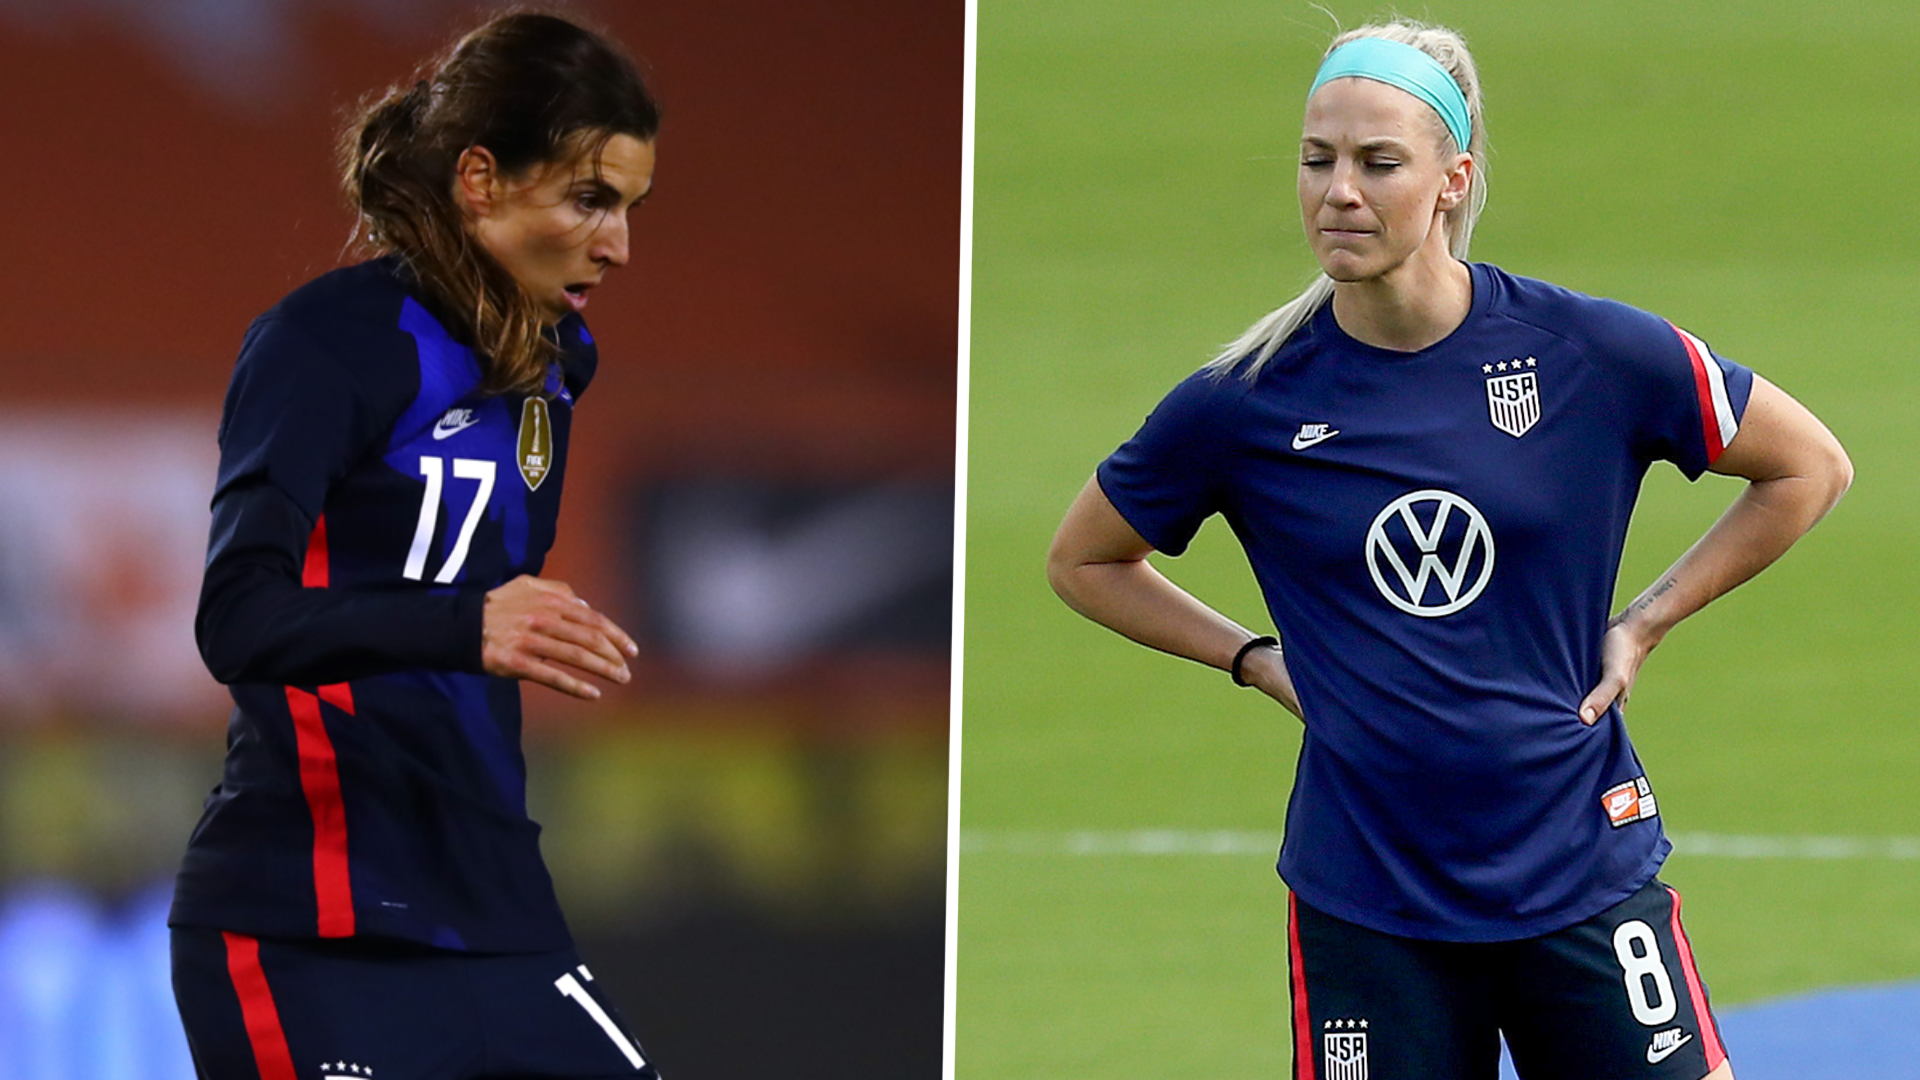 USWNT stars Heath and Ertz 'on schedule' to play in Olympics, says Andonovski